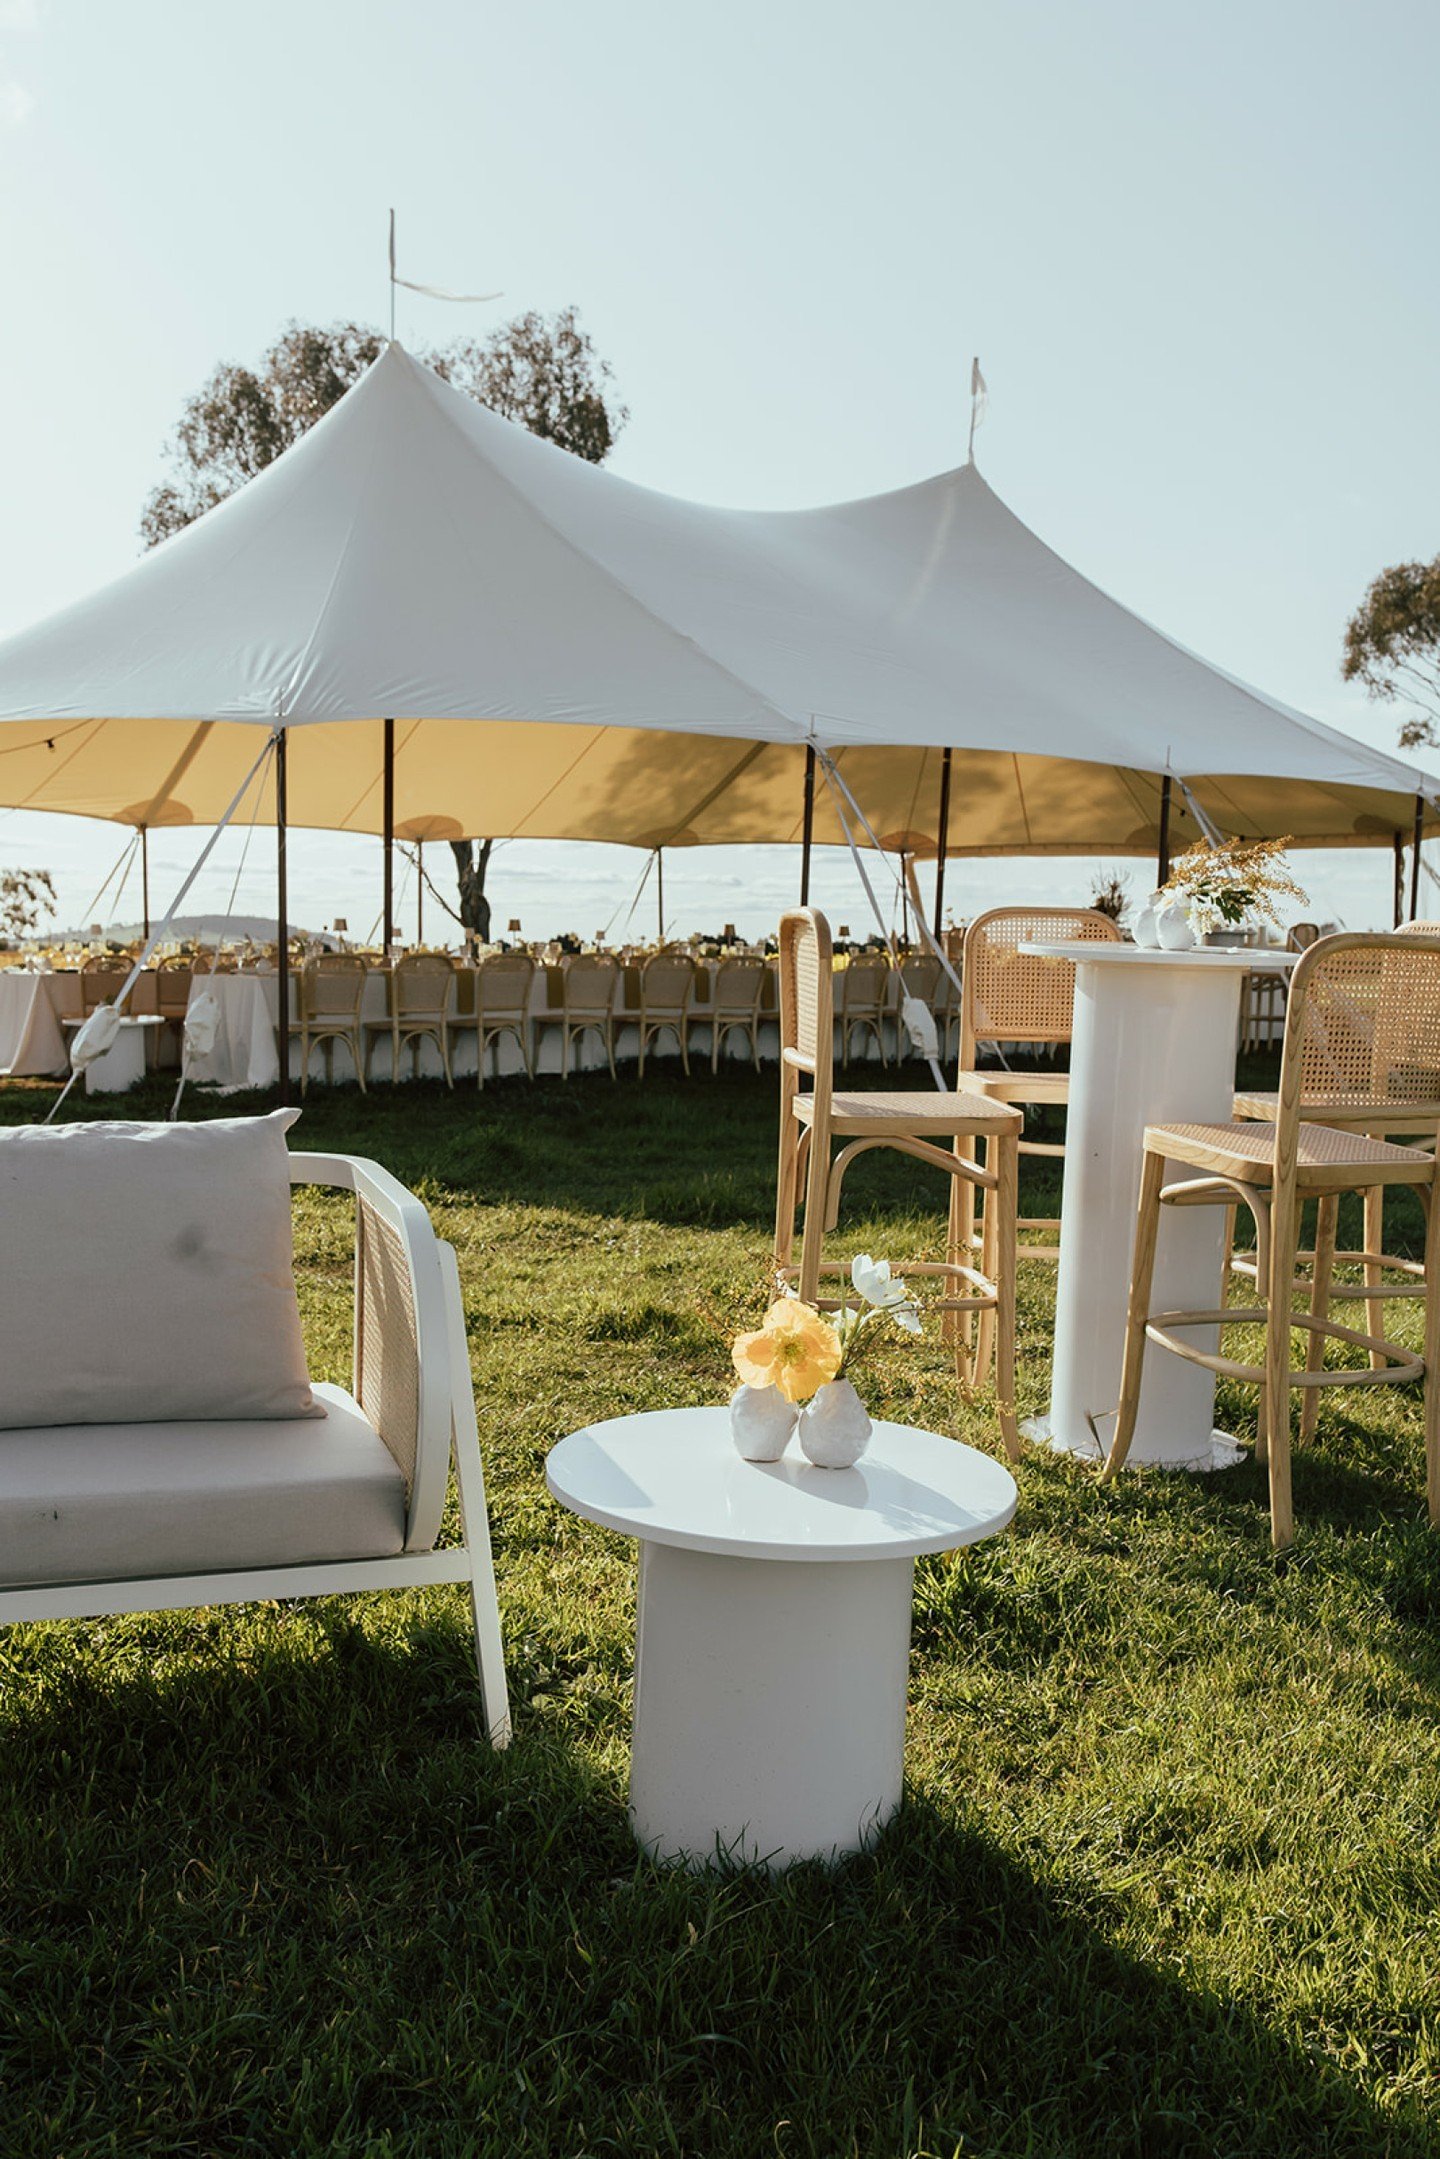 The Hampton in all her glory atop the hill at @ryeattallis!
A match made in heaven featuring our timber rattan chairs and stools, cylinder bar and coffee tables and Hampton lounge.

Venue @ryeattallis
Marquee and furniture @bangeventco
Photography @l